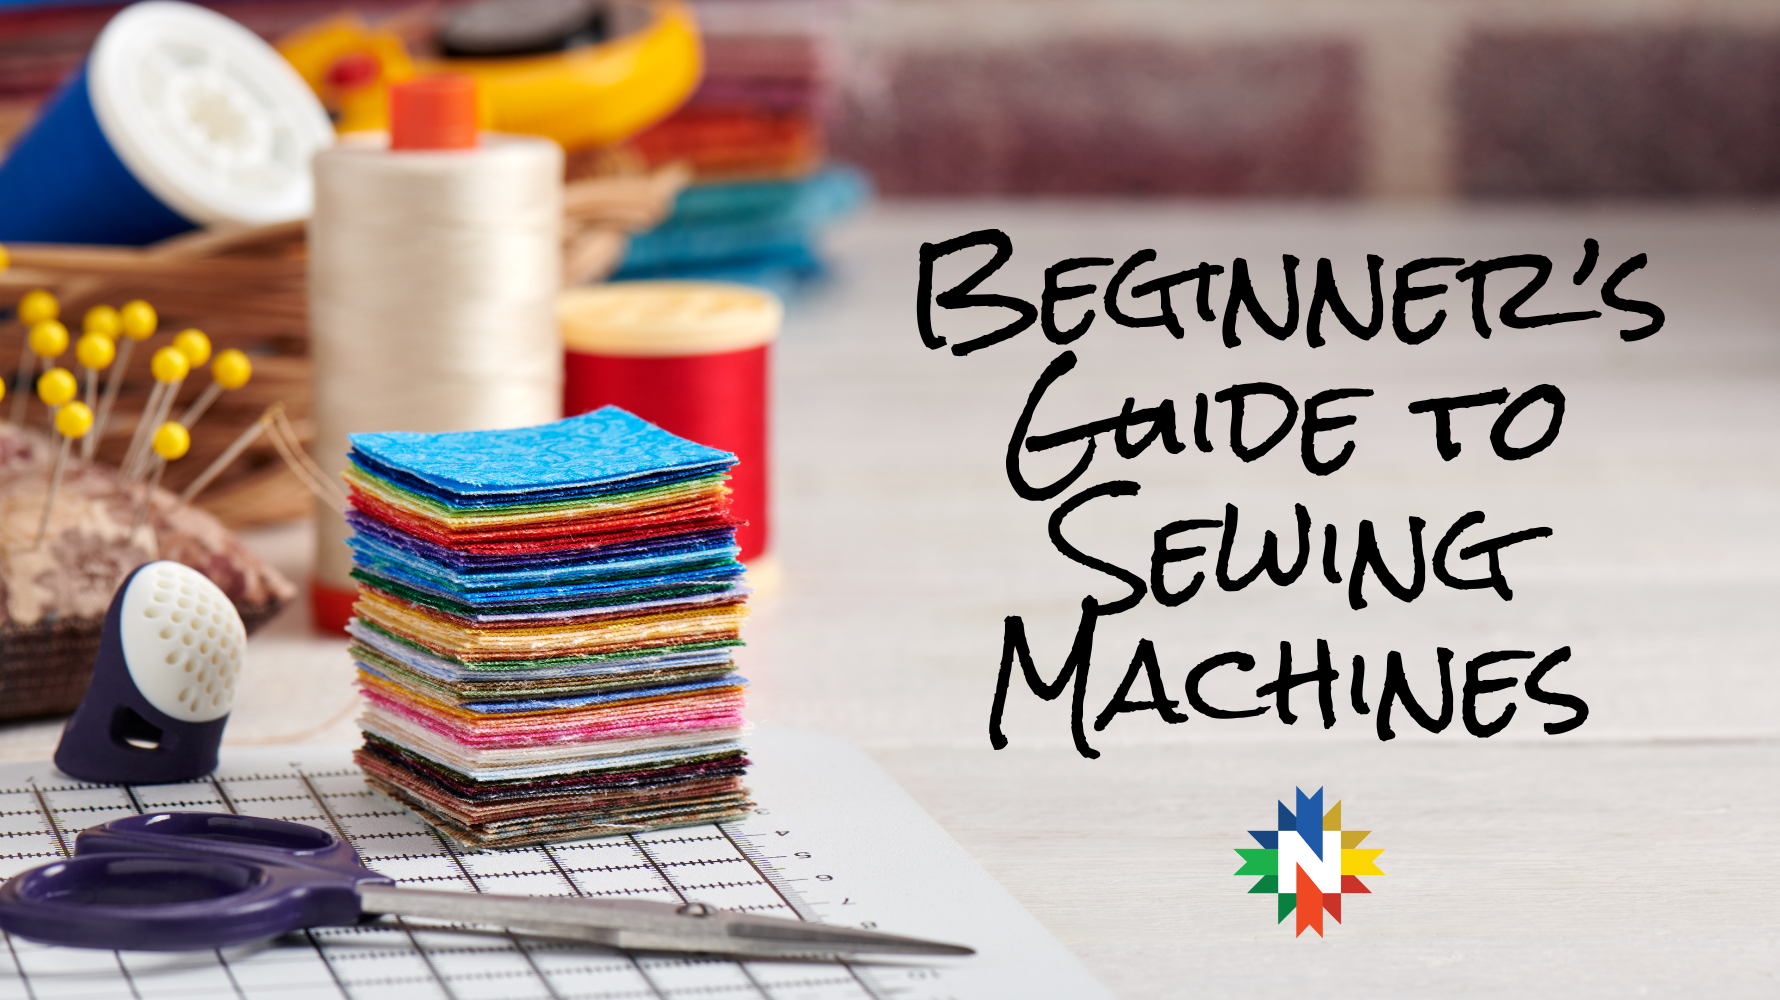 Beginner’s Guide to Sewing Machines: Domestic, Serger, Longarm, and Embroidery